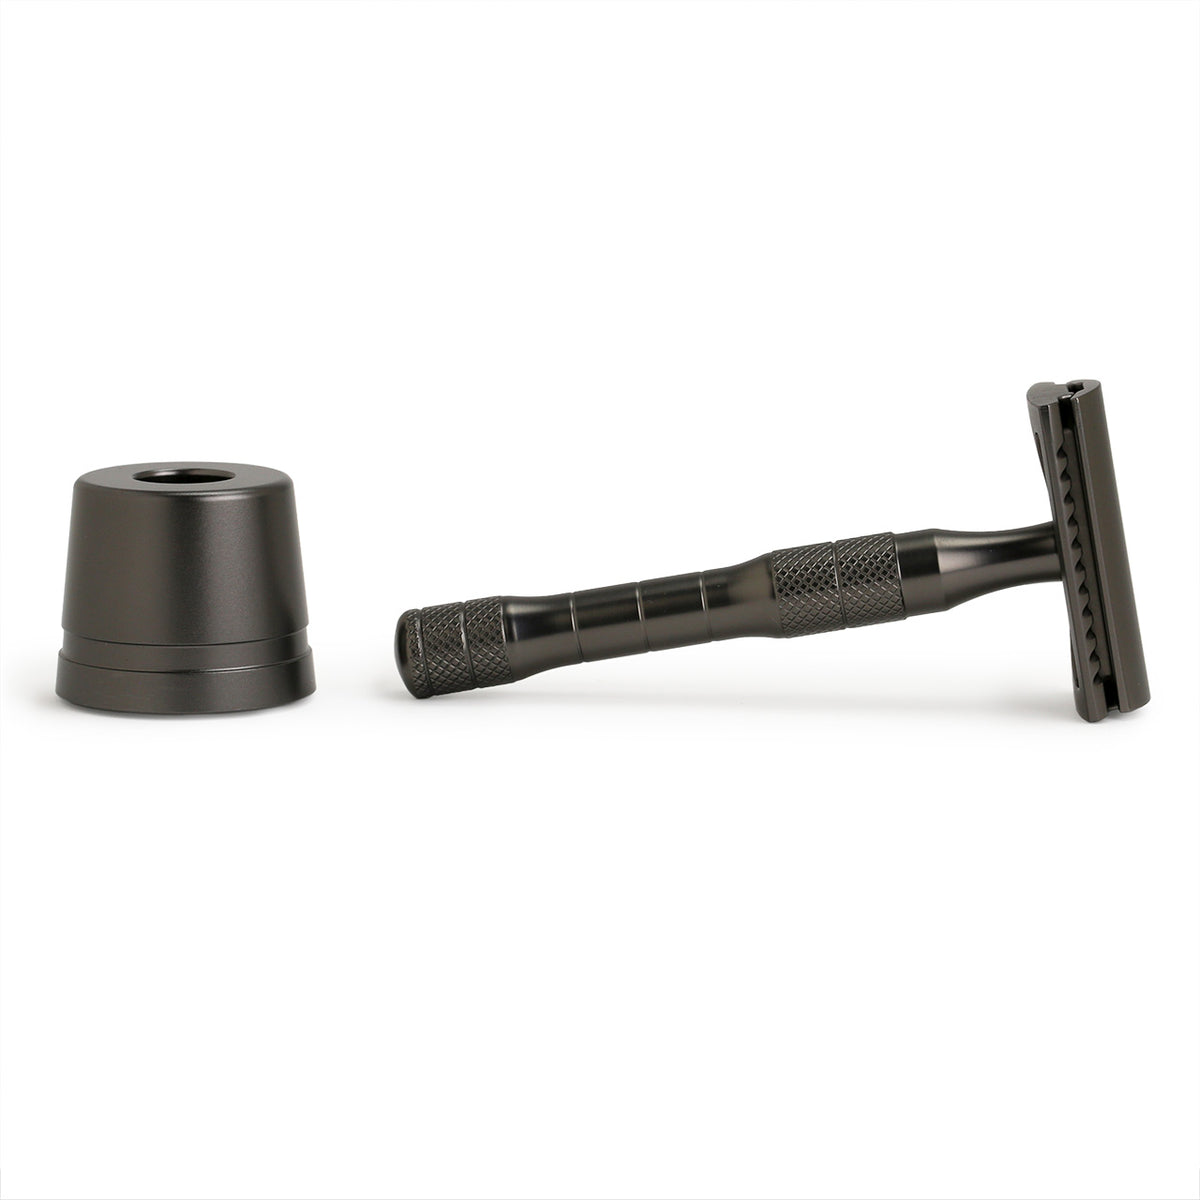 Daily Shaver with charcoal-coloured finish is a three piece razor and comes with a heavy base-style stand